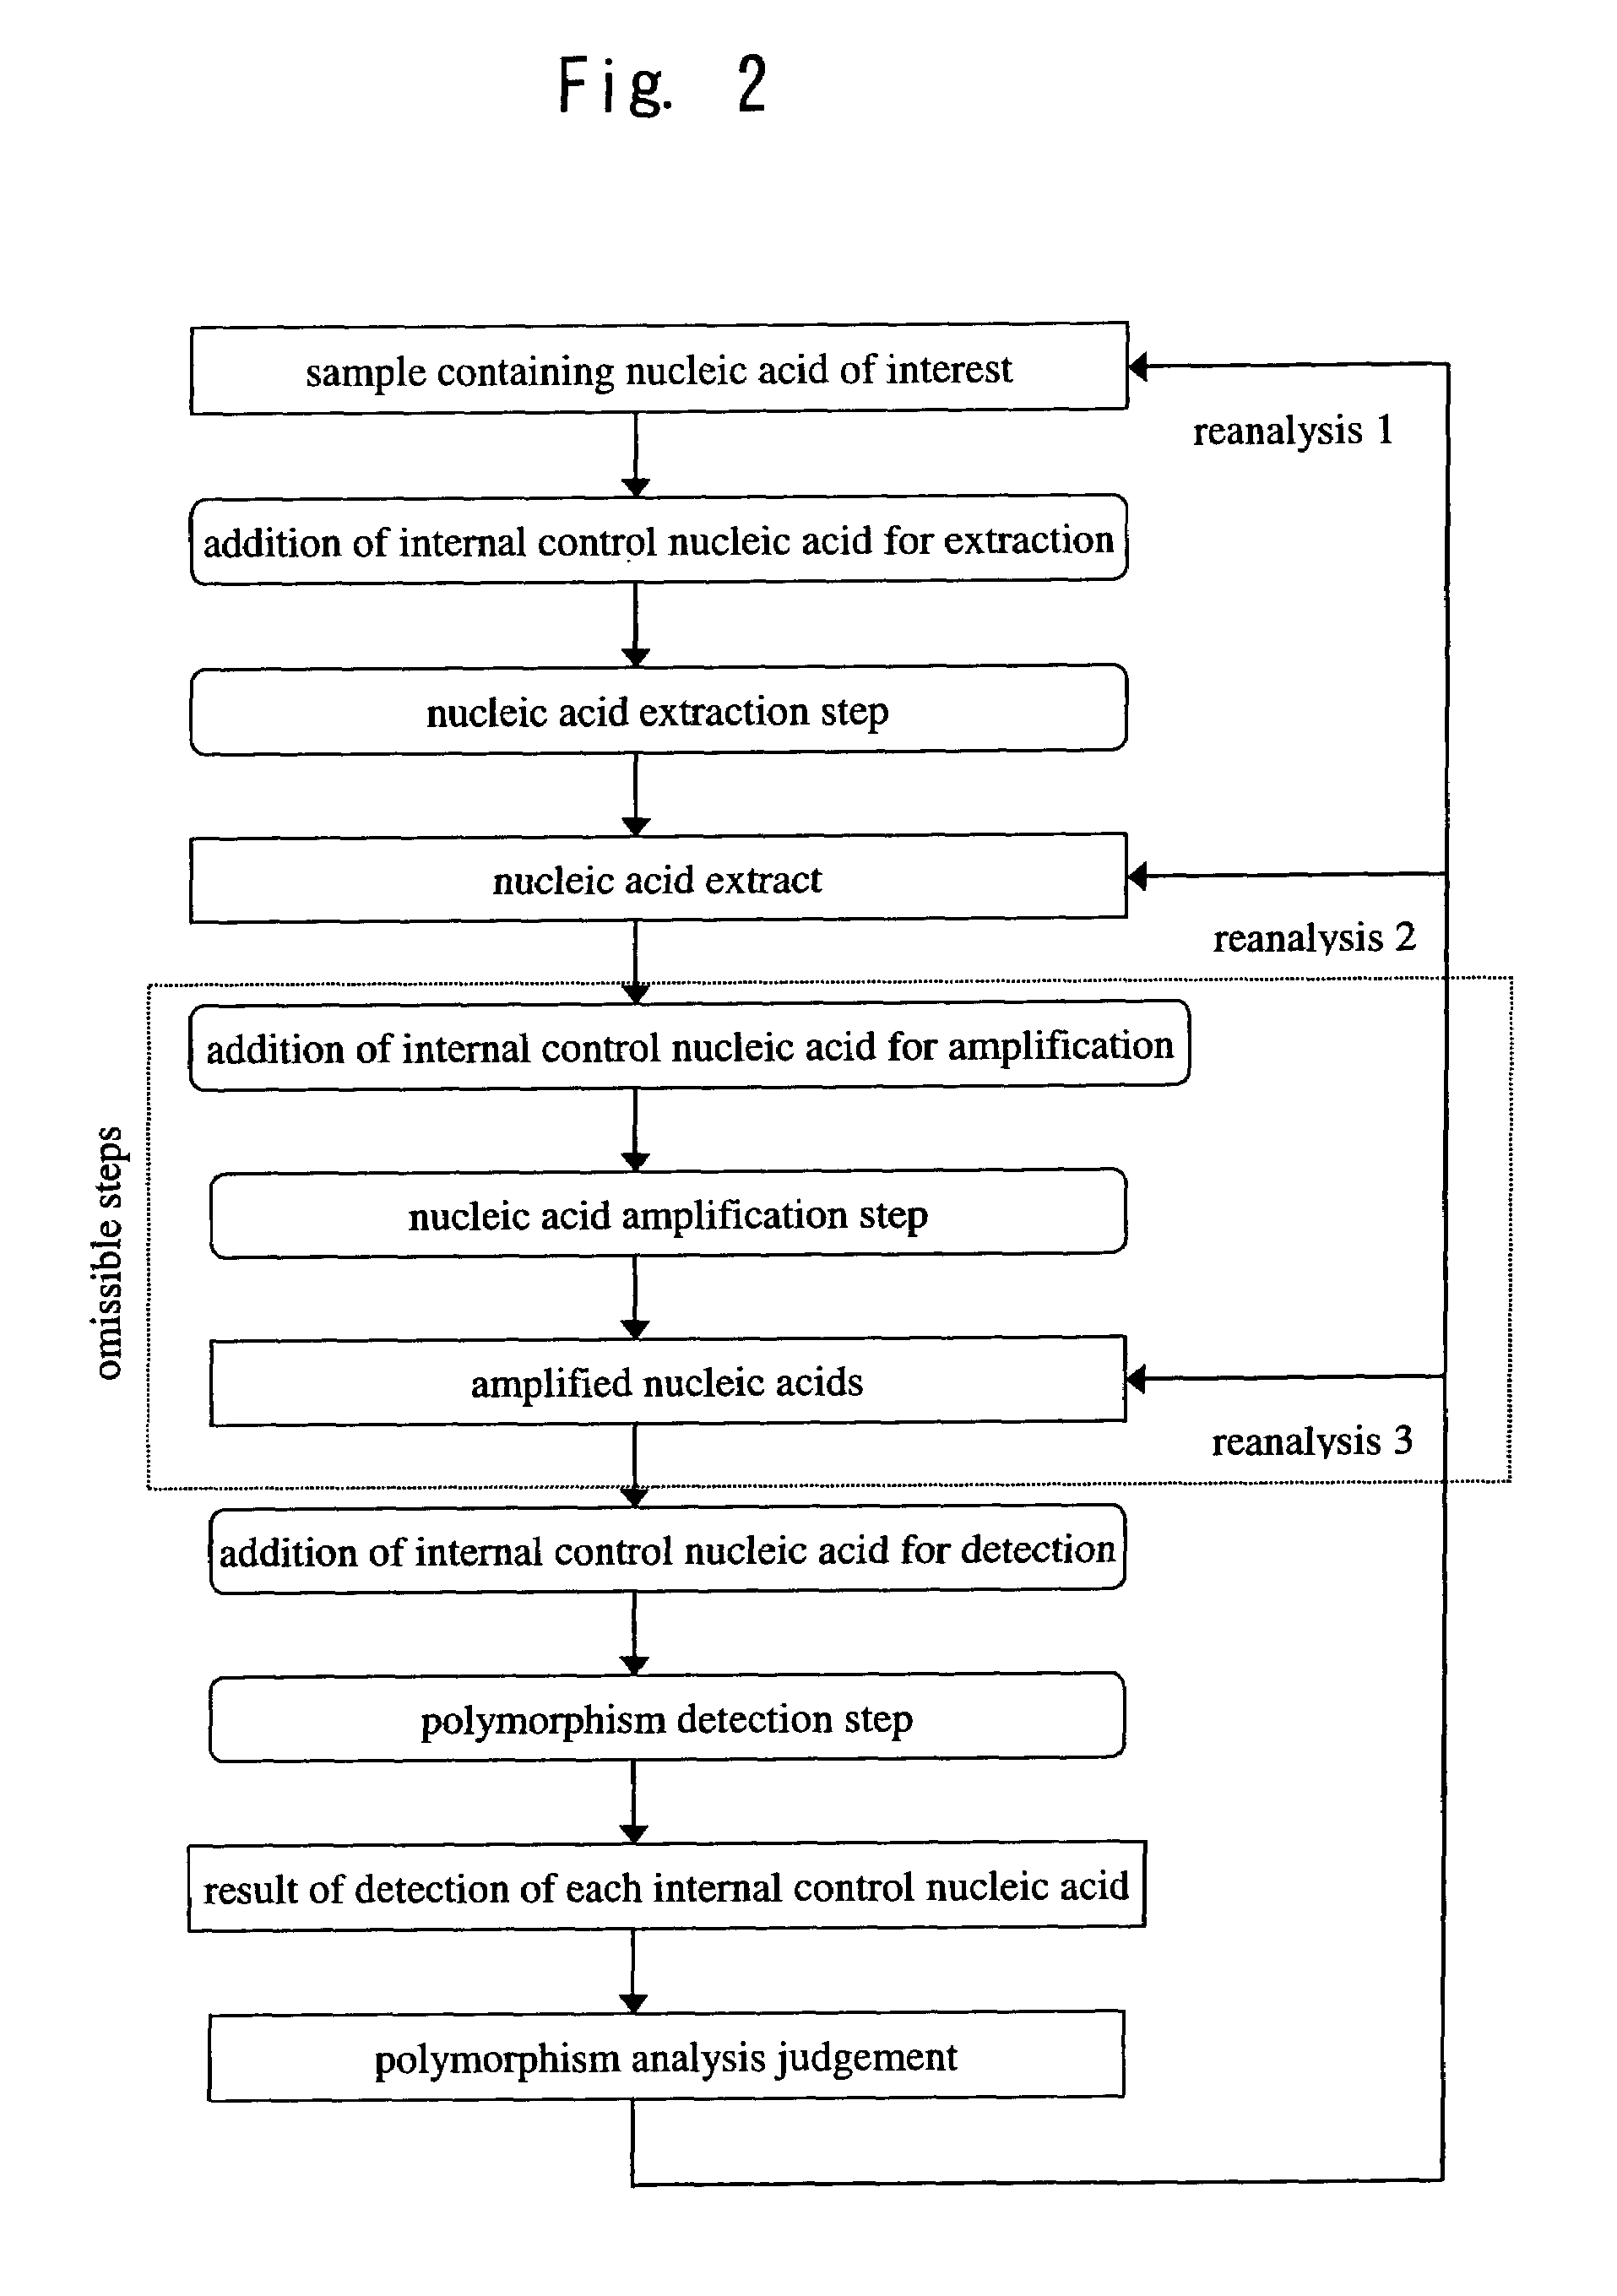 Method for analyzing nucleic acid